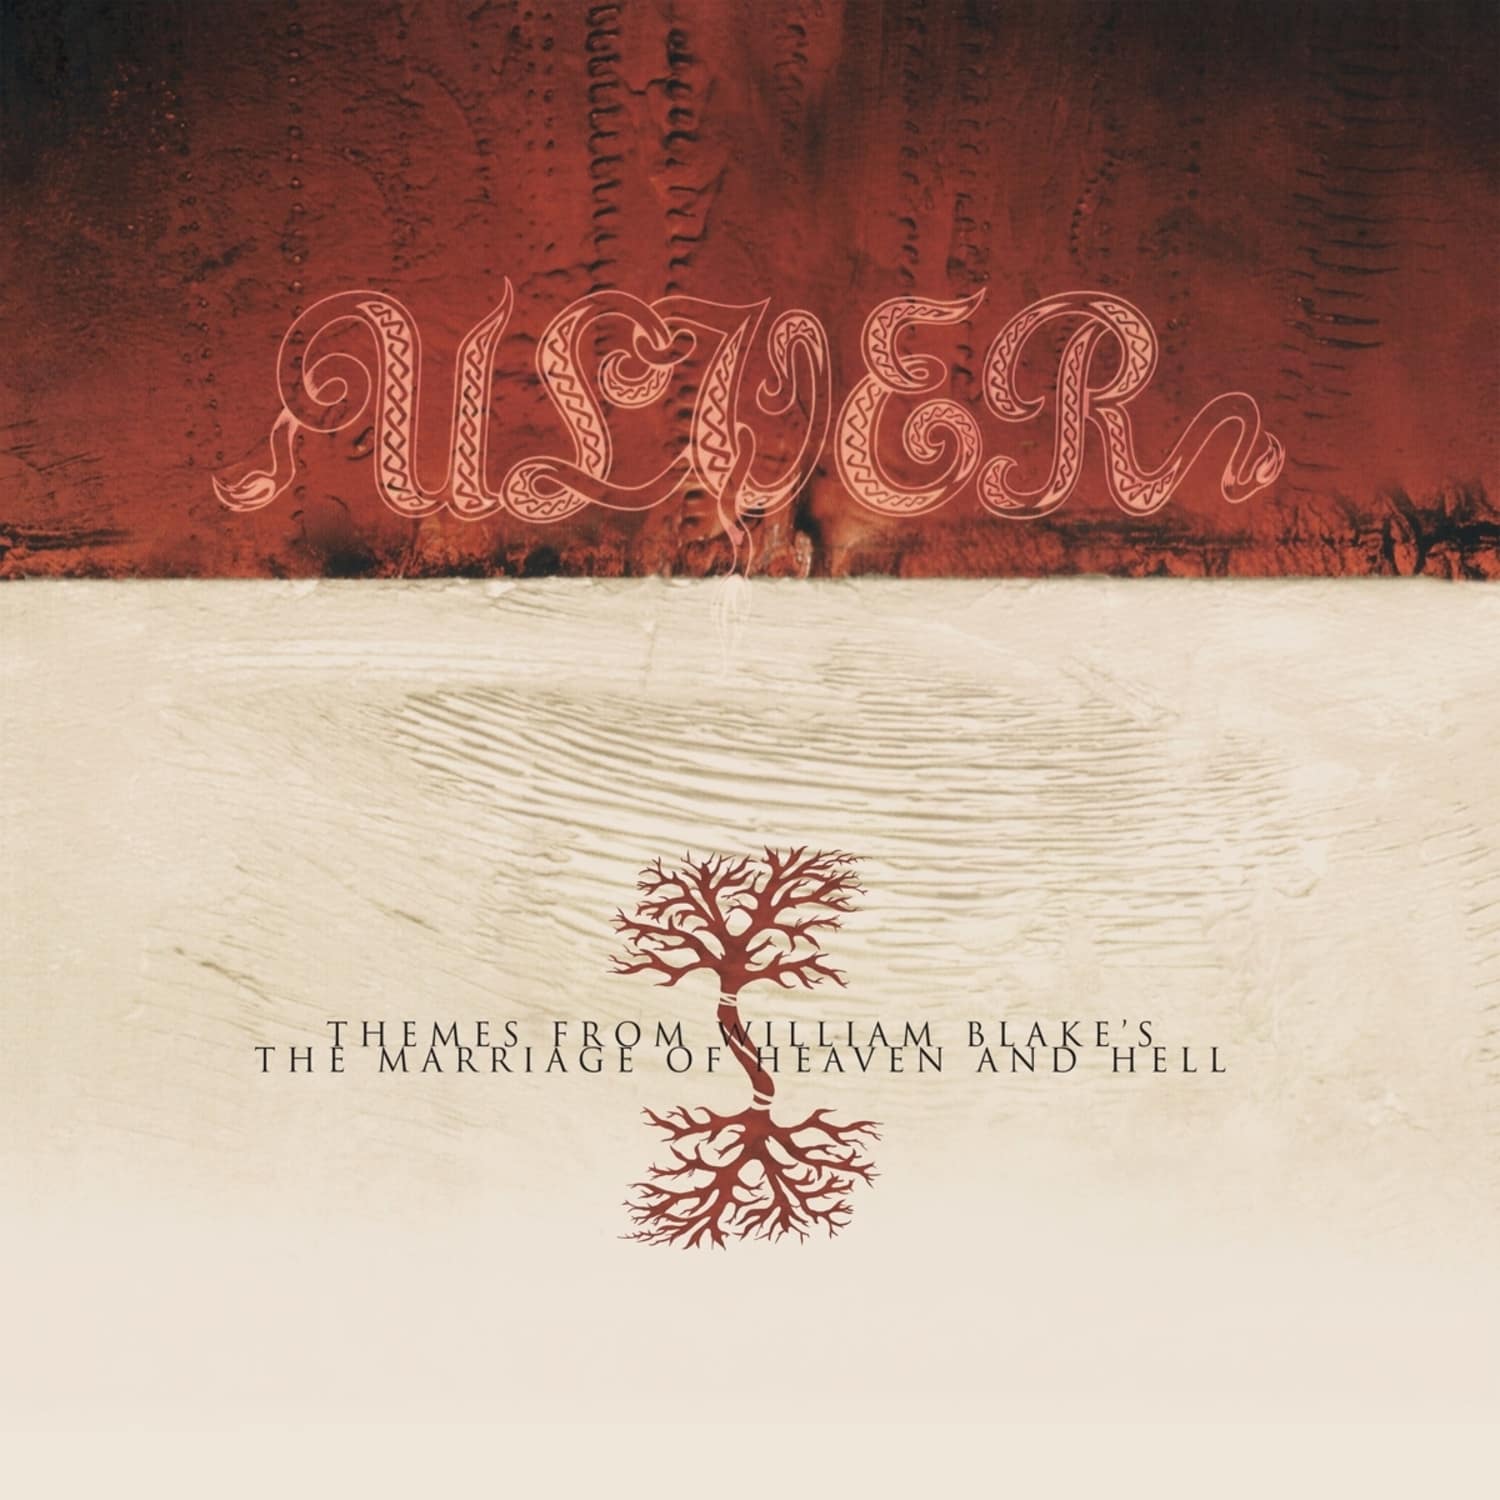 Ulver - THEMES FROM WILLIAM BLAKE 